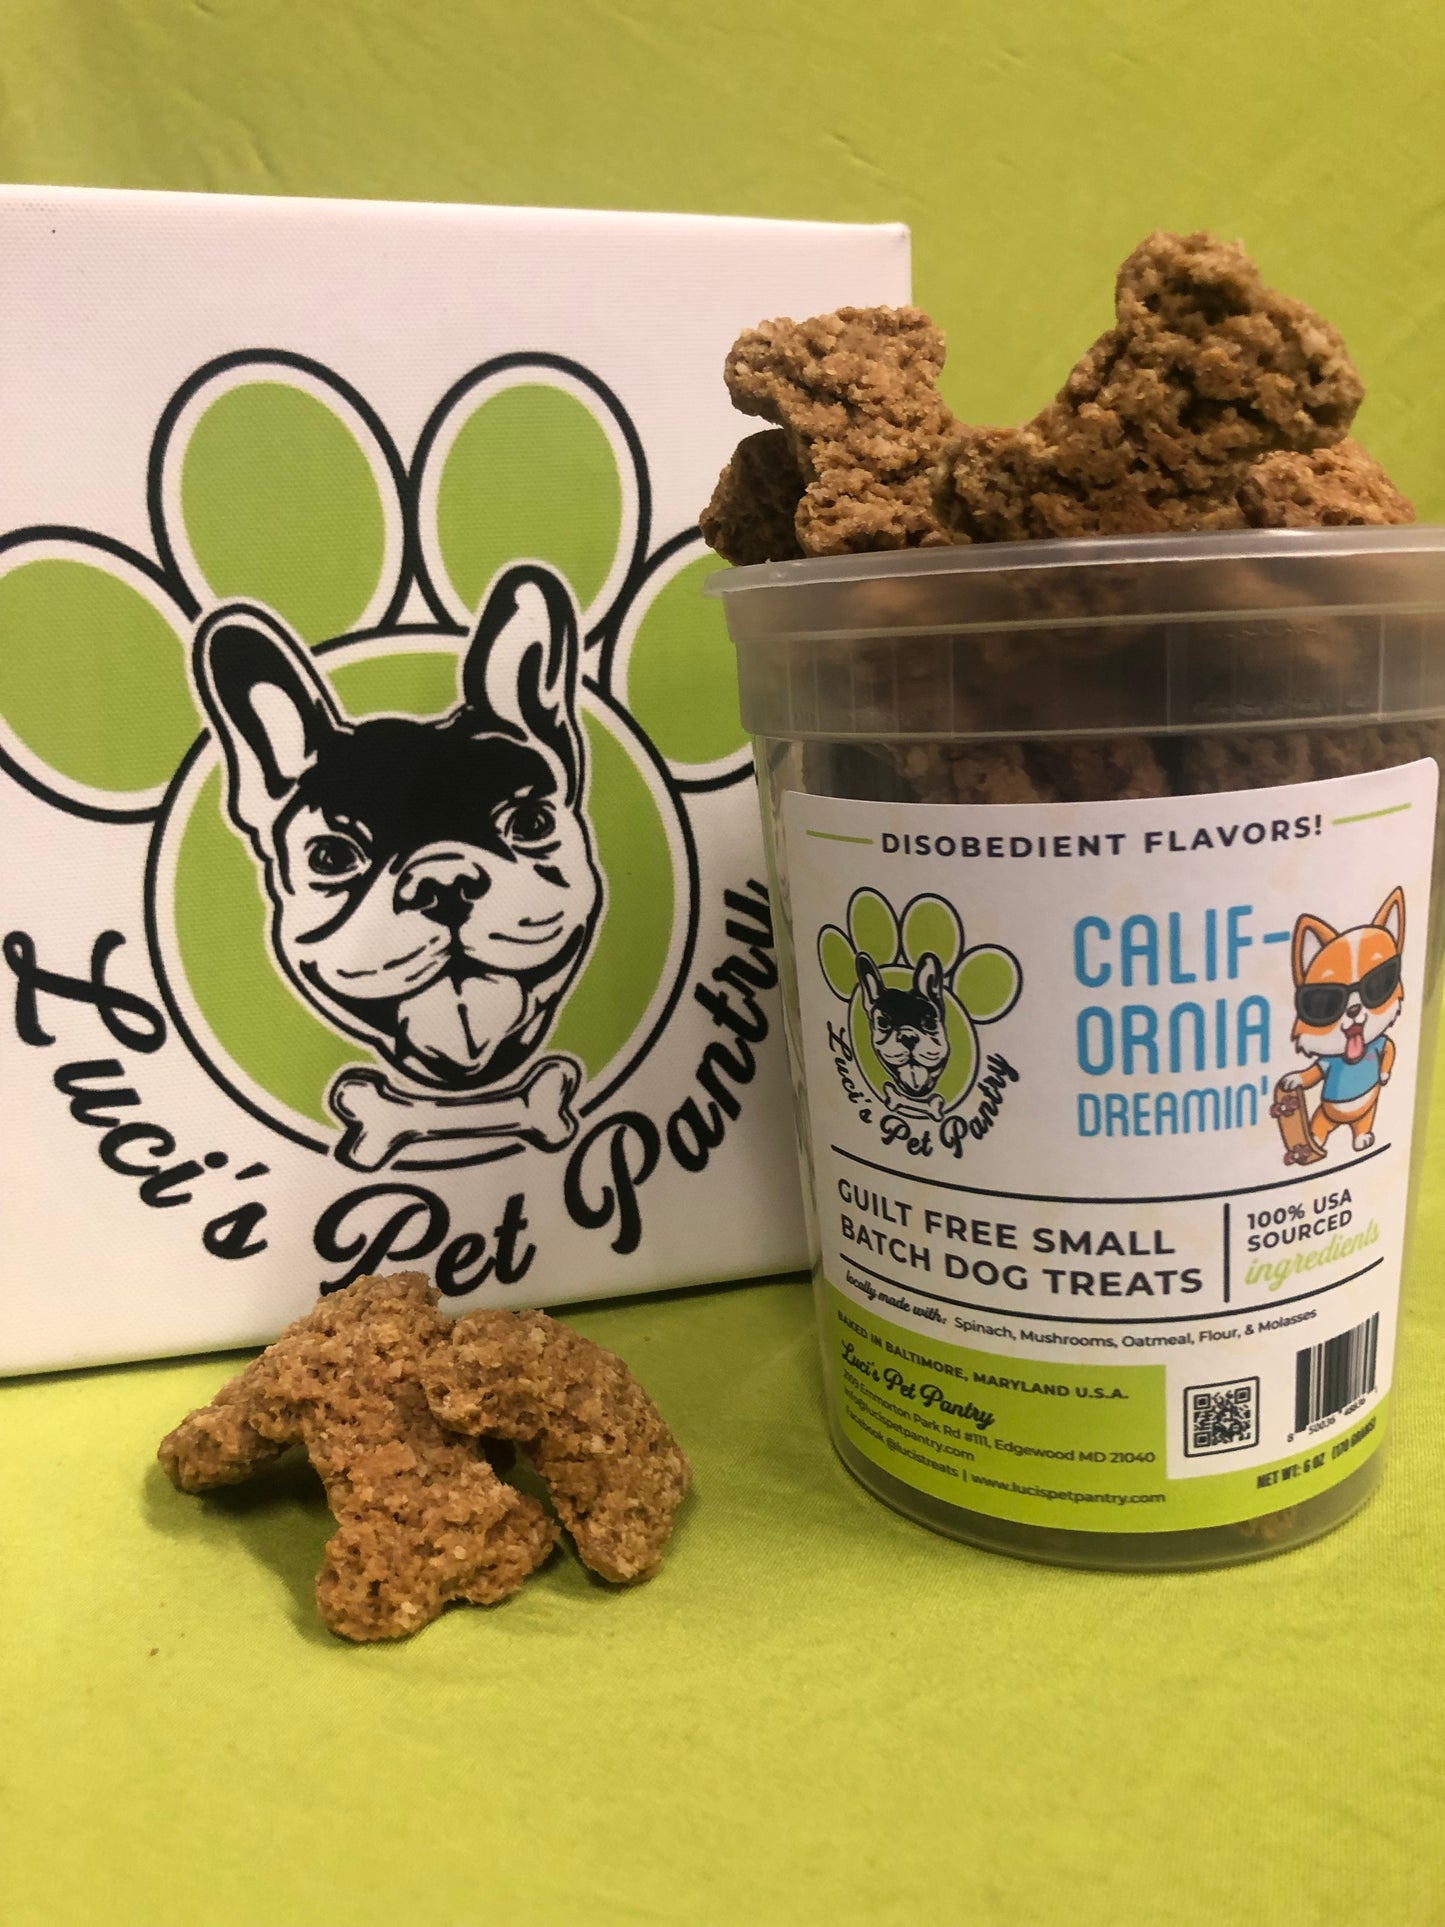 California Dreamin' - All Natural "Spinach & Mushroom" Dog & Puppy Treats - Disobedient Tub of Biscuits